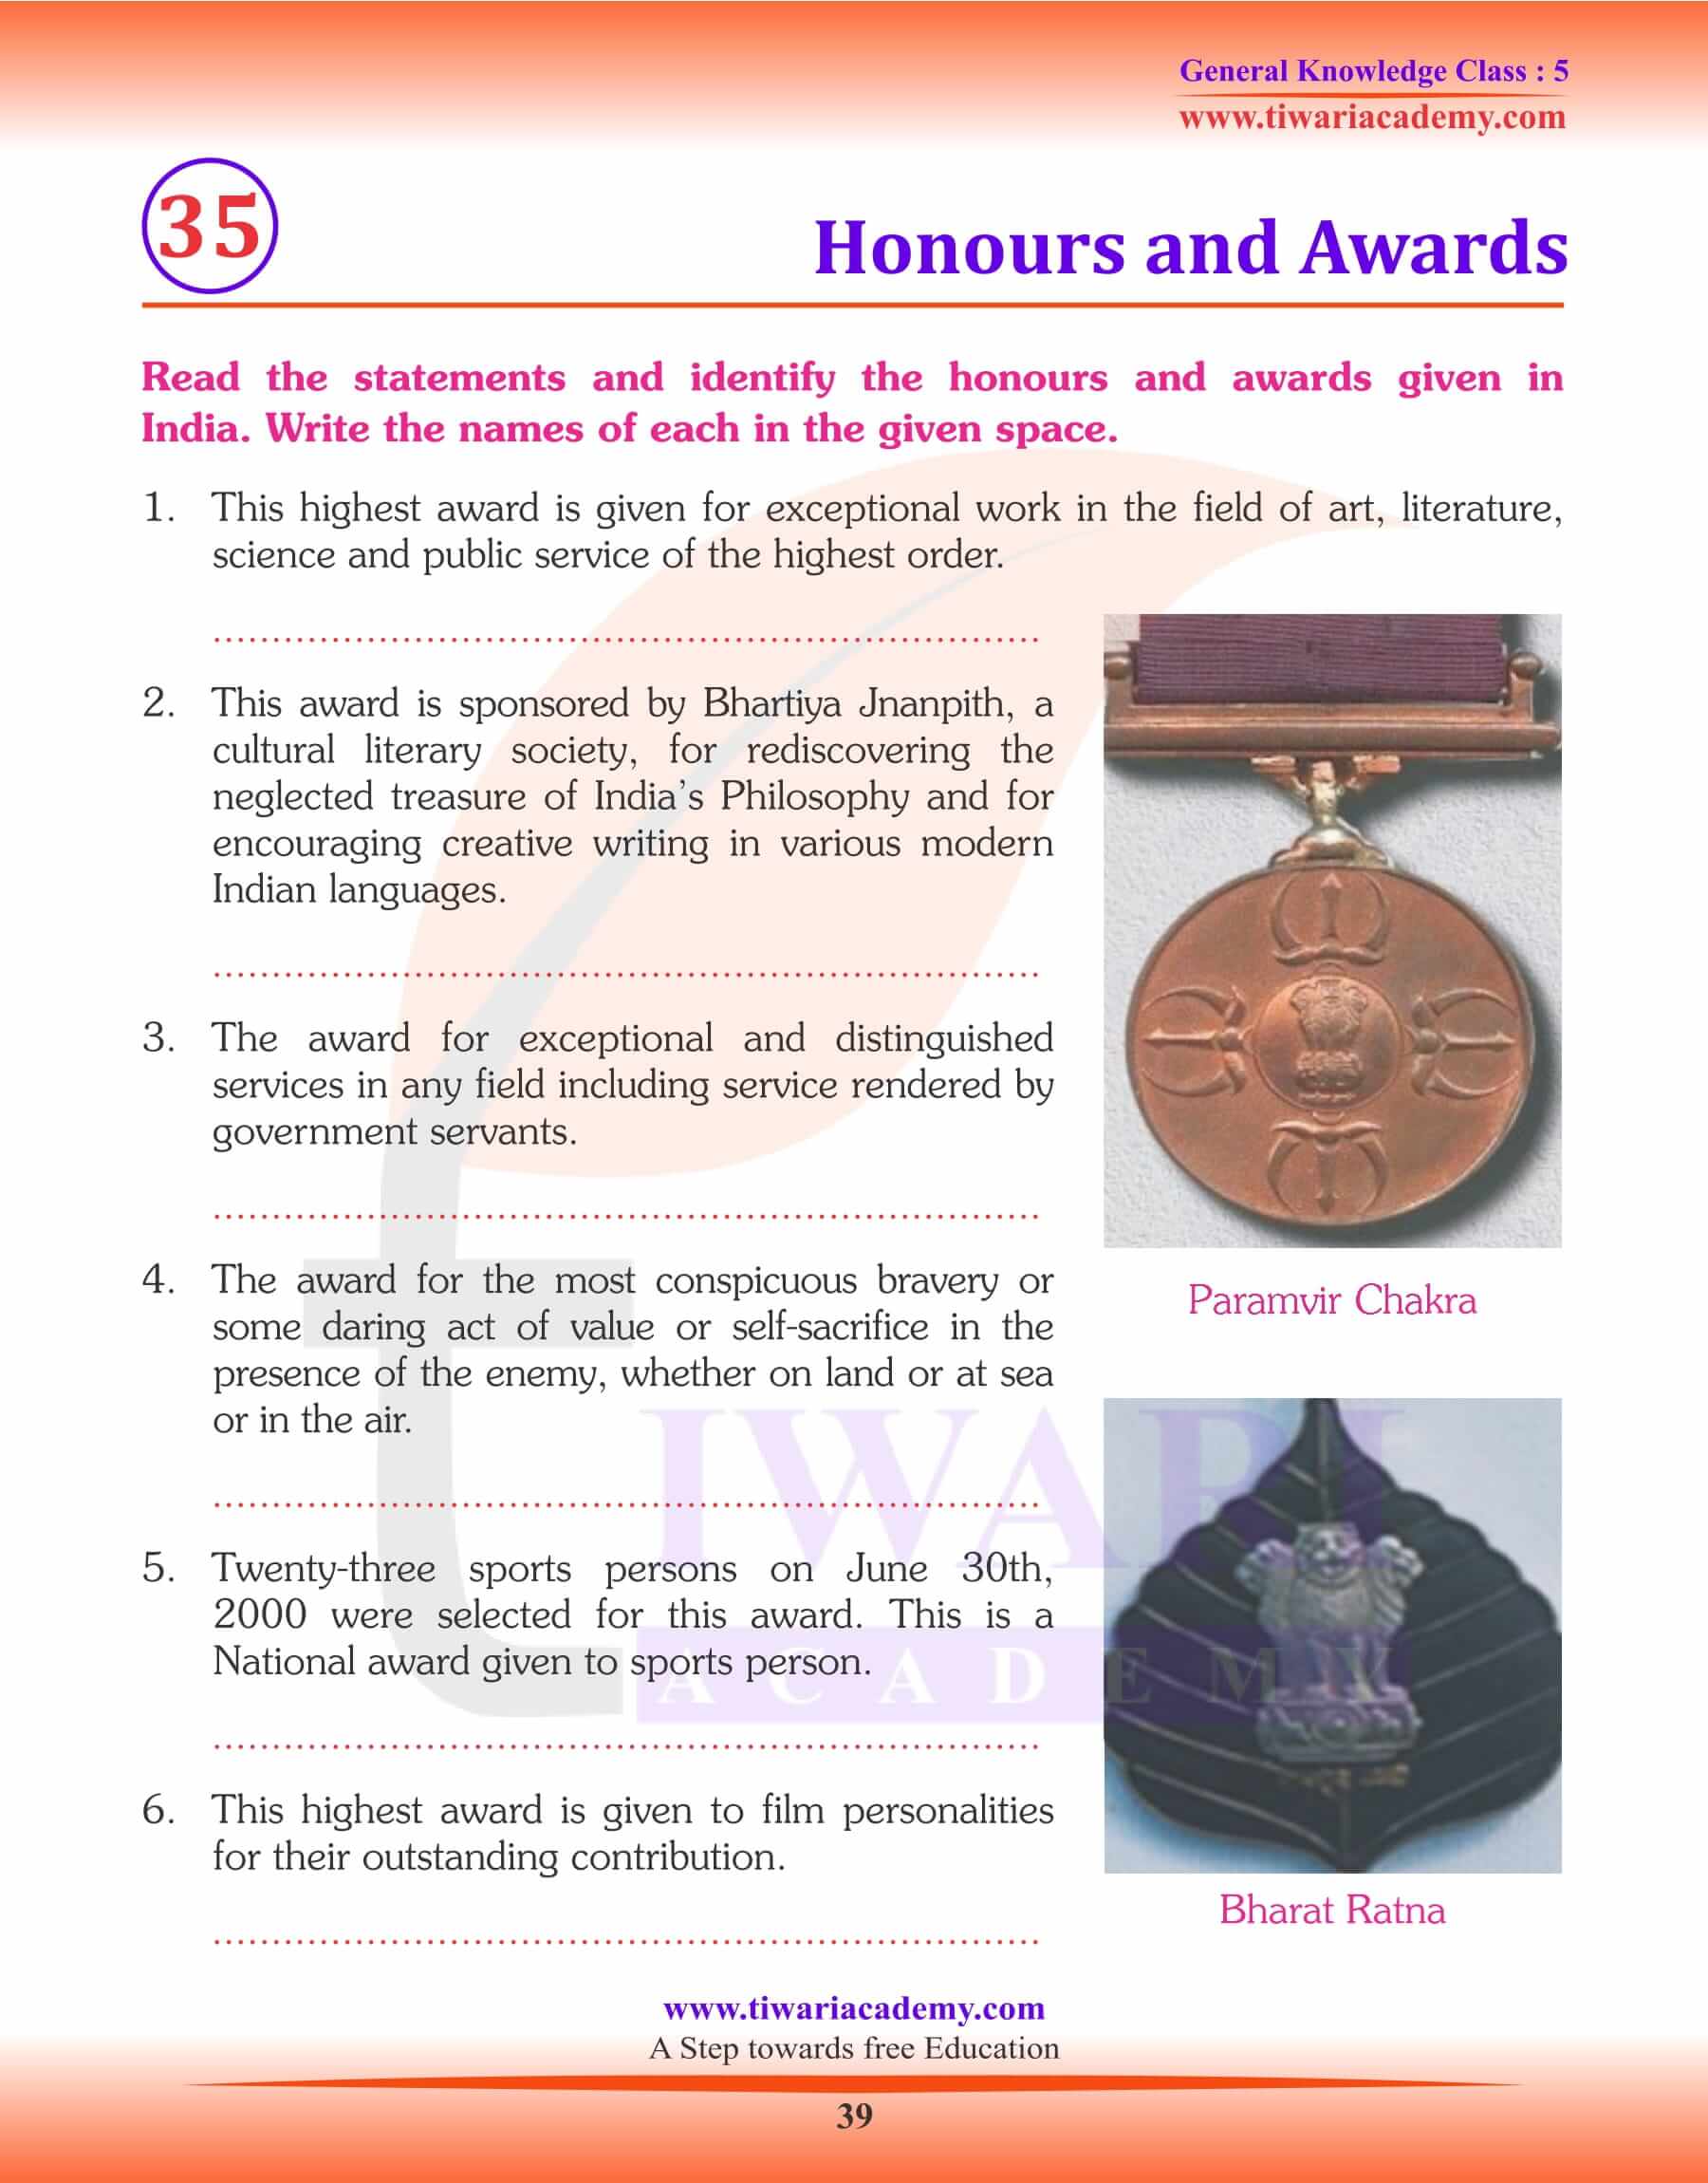 Honours and Awards